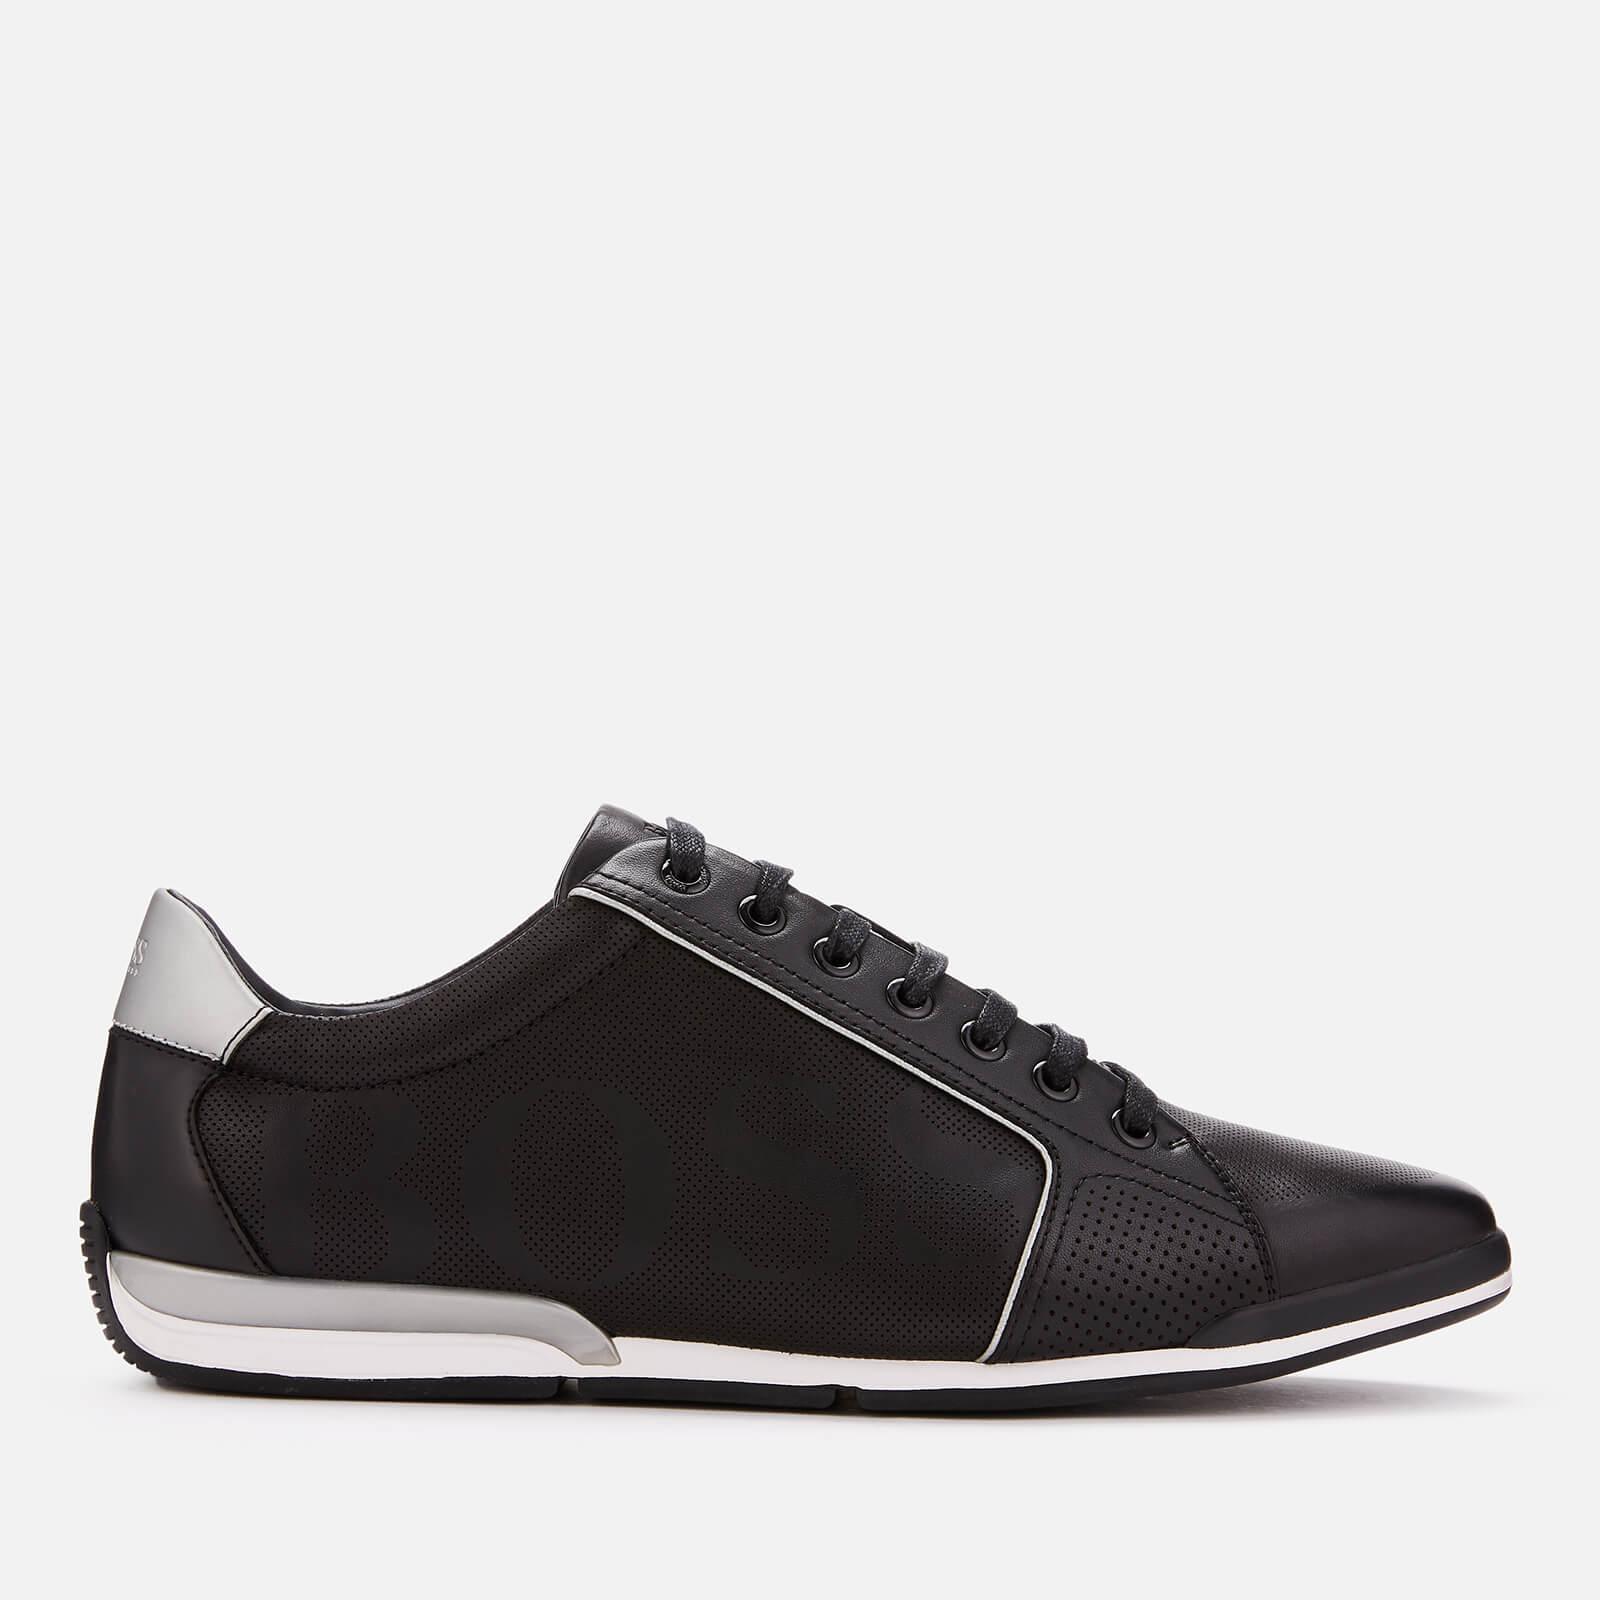 hugo boss saturn low leather trainers